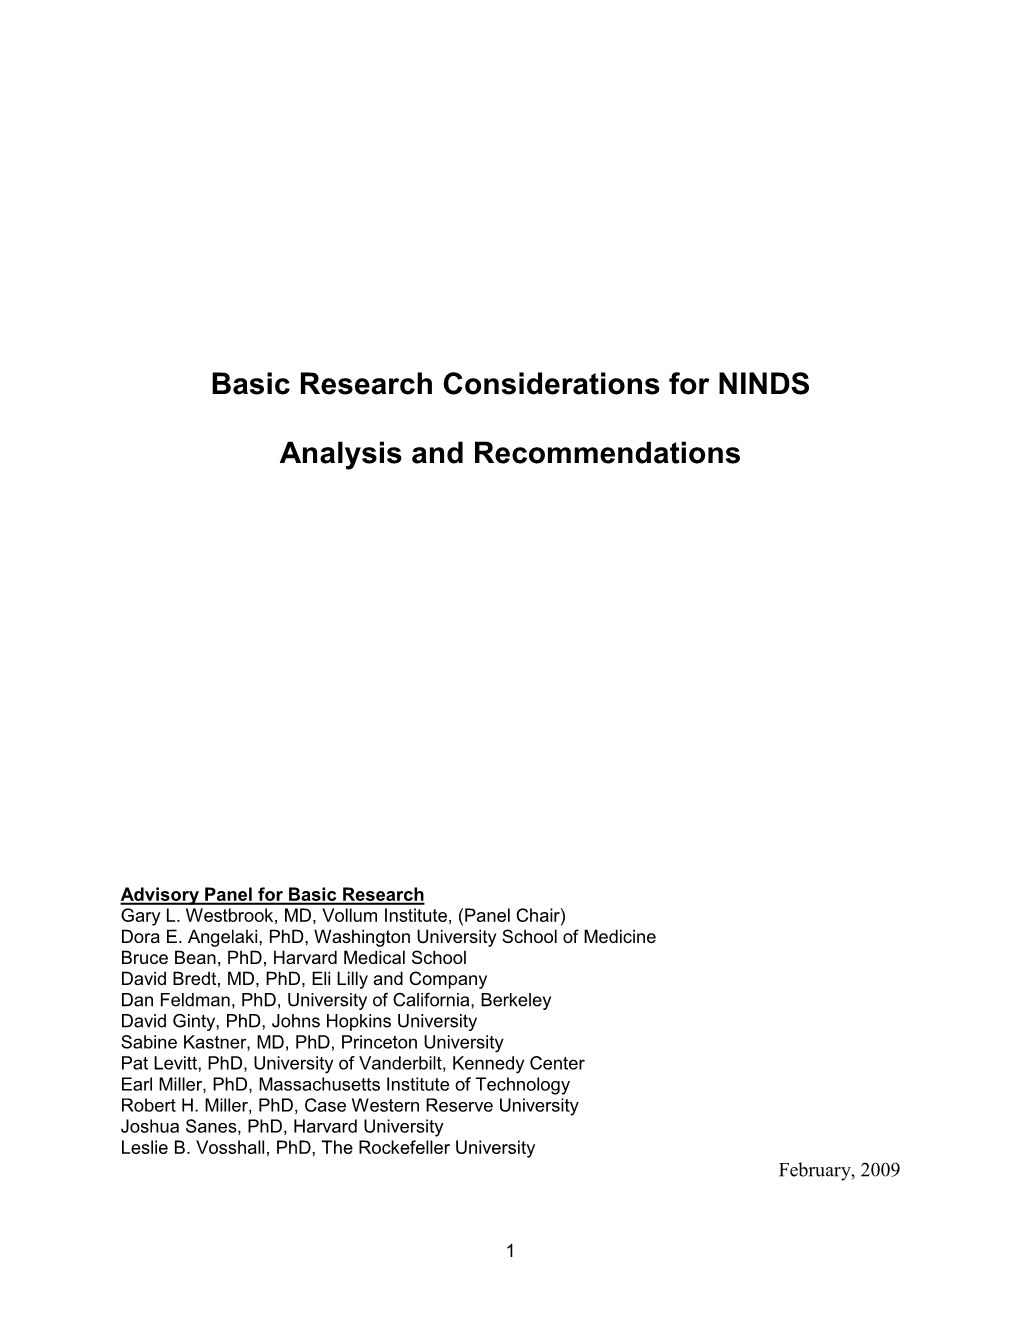 Basic Research Considerations for NINDS Analysis And